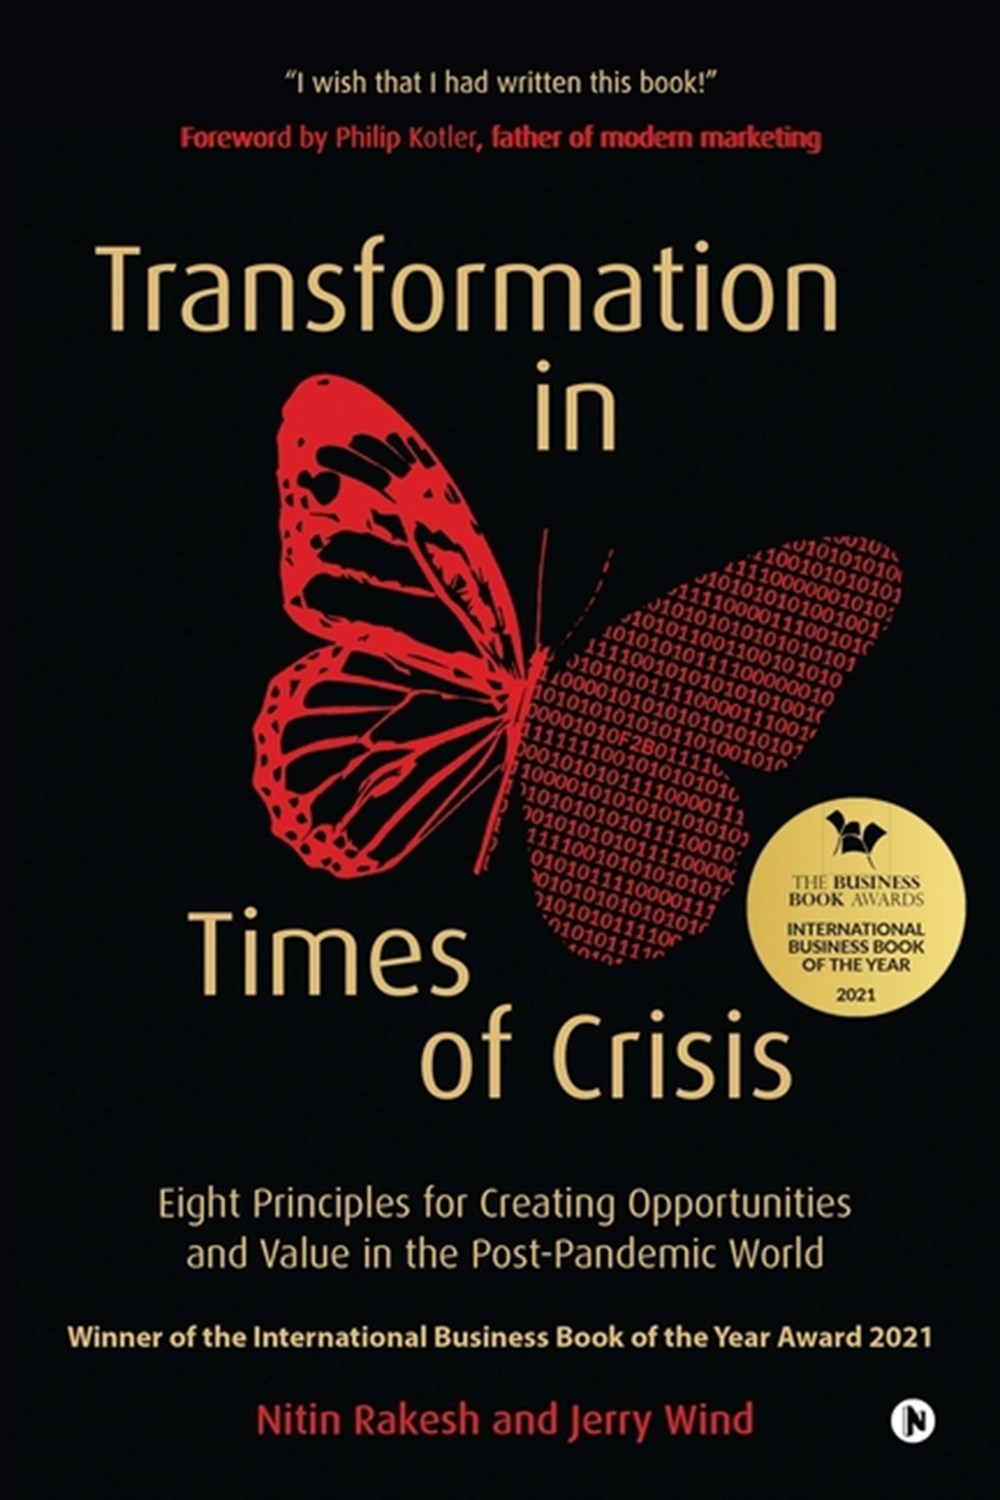 Transformation in Times of Crisis Eight Principles for Creating Opportunities and Value in the Post-